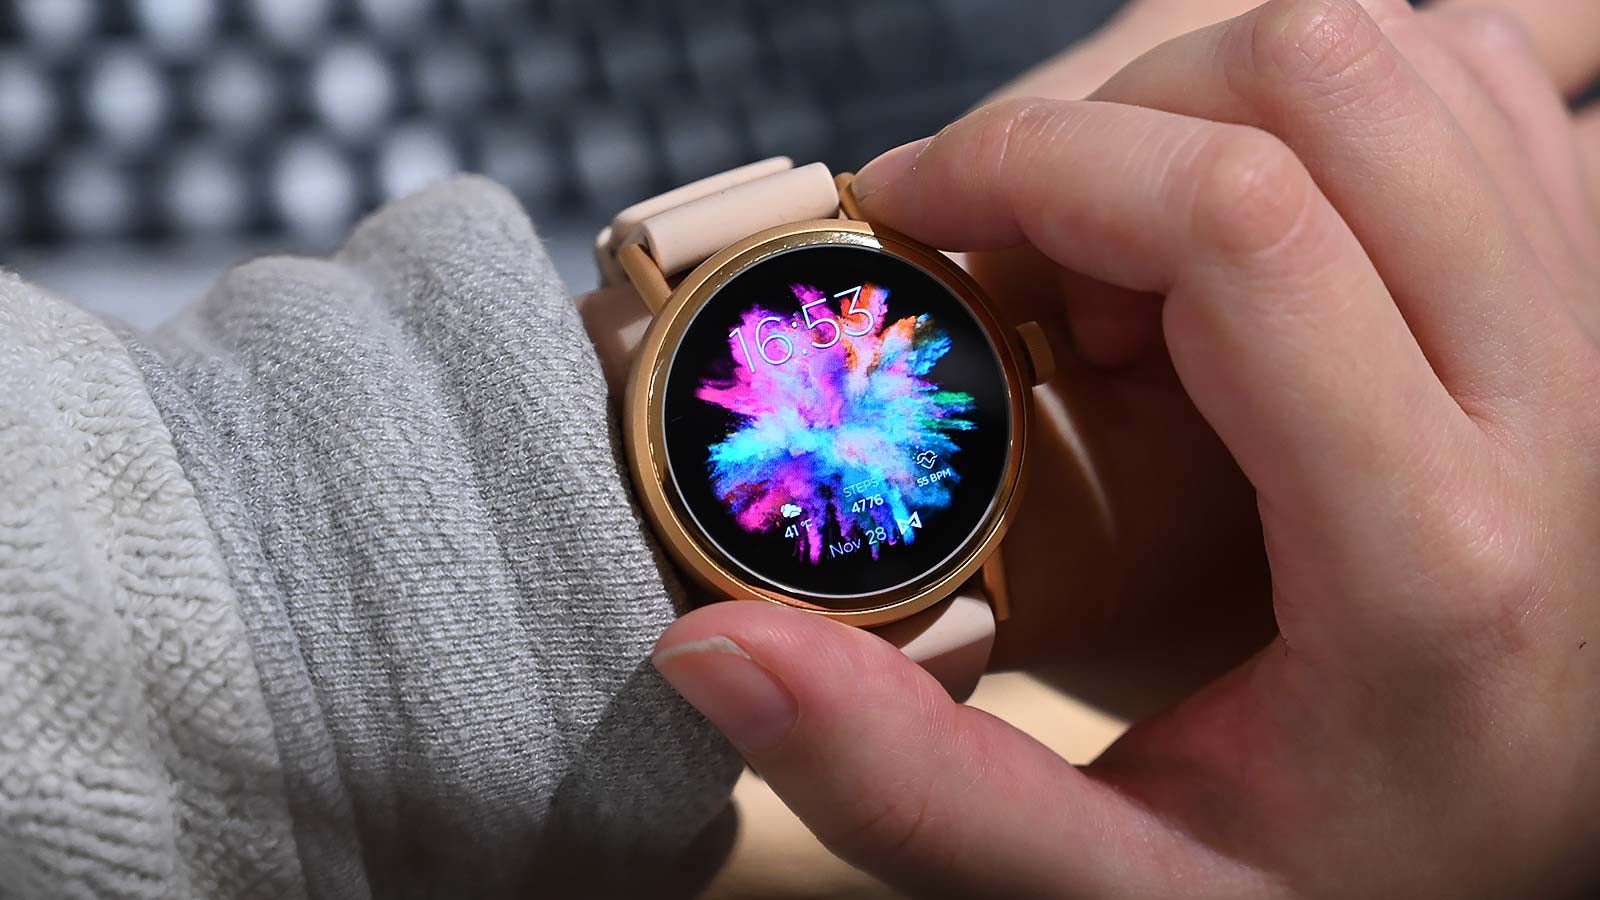 This Smartwatch Has Incredibly Bad Timing | Gizmodo UK